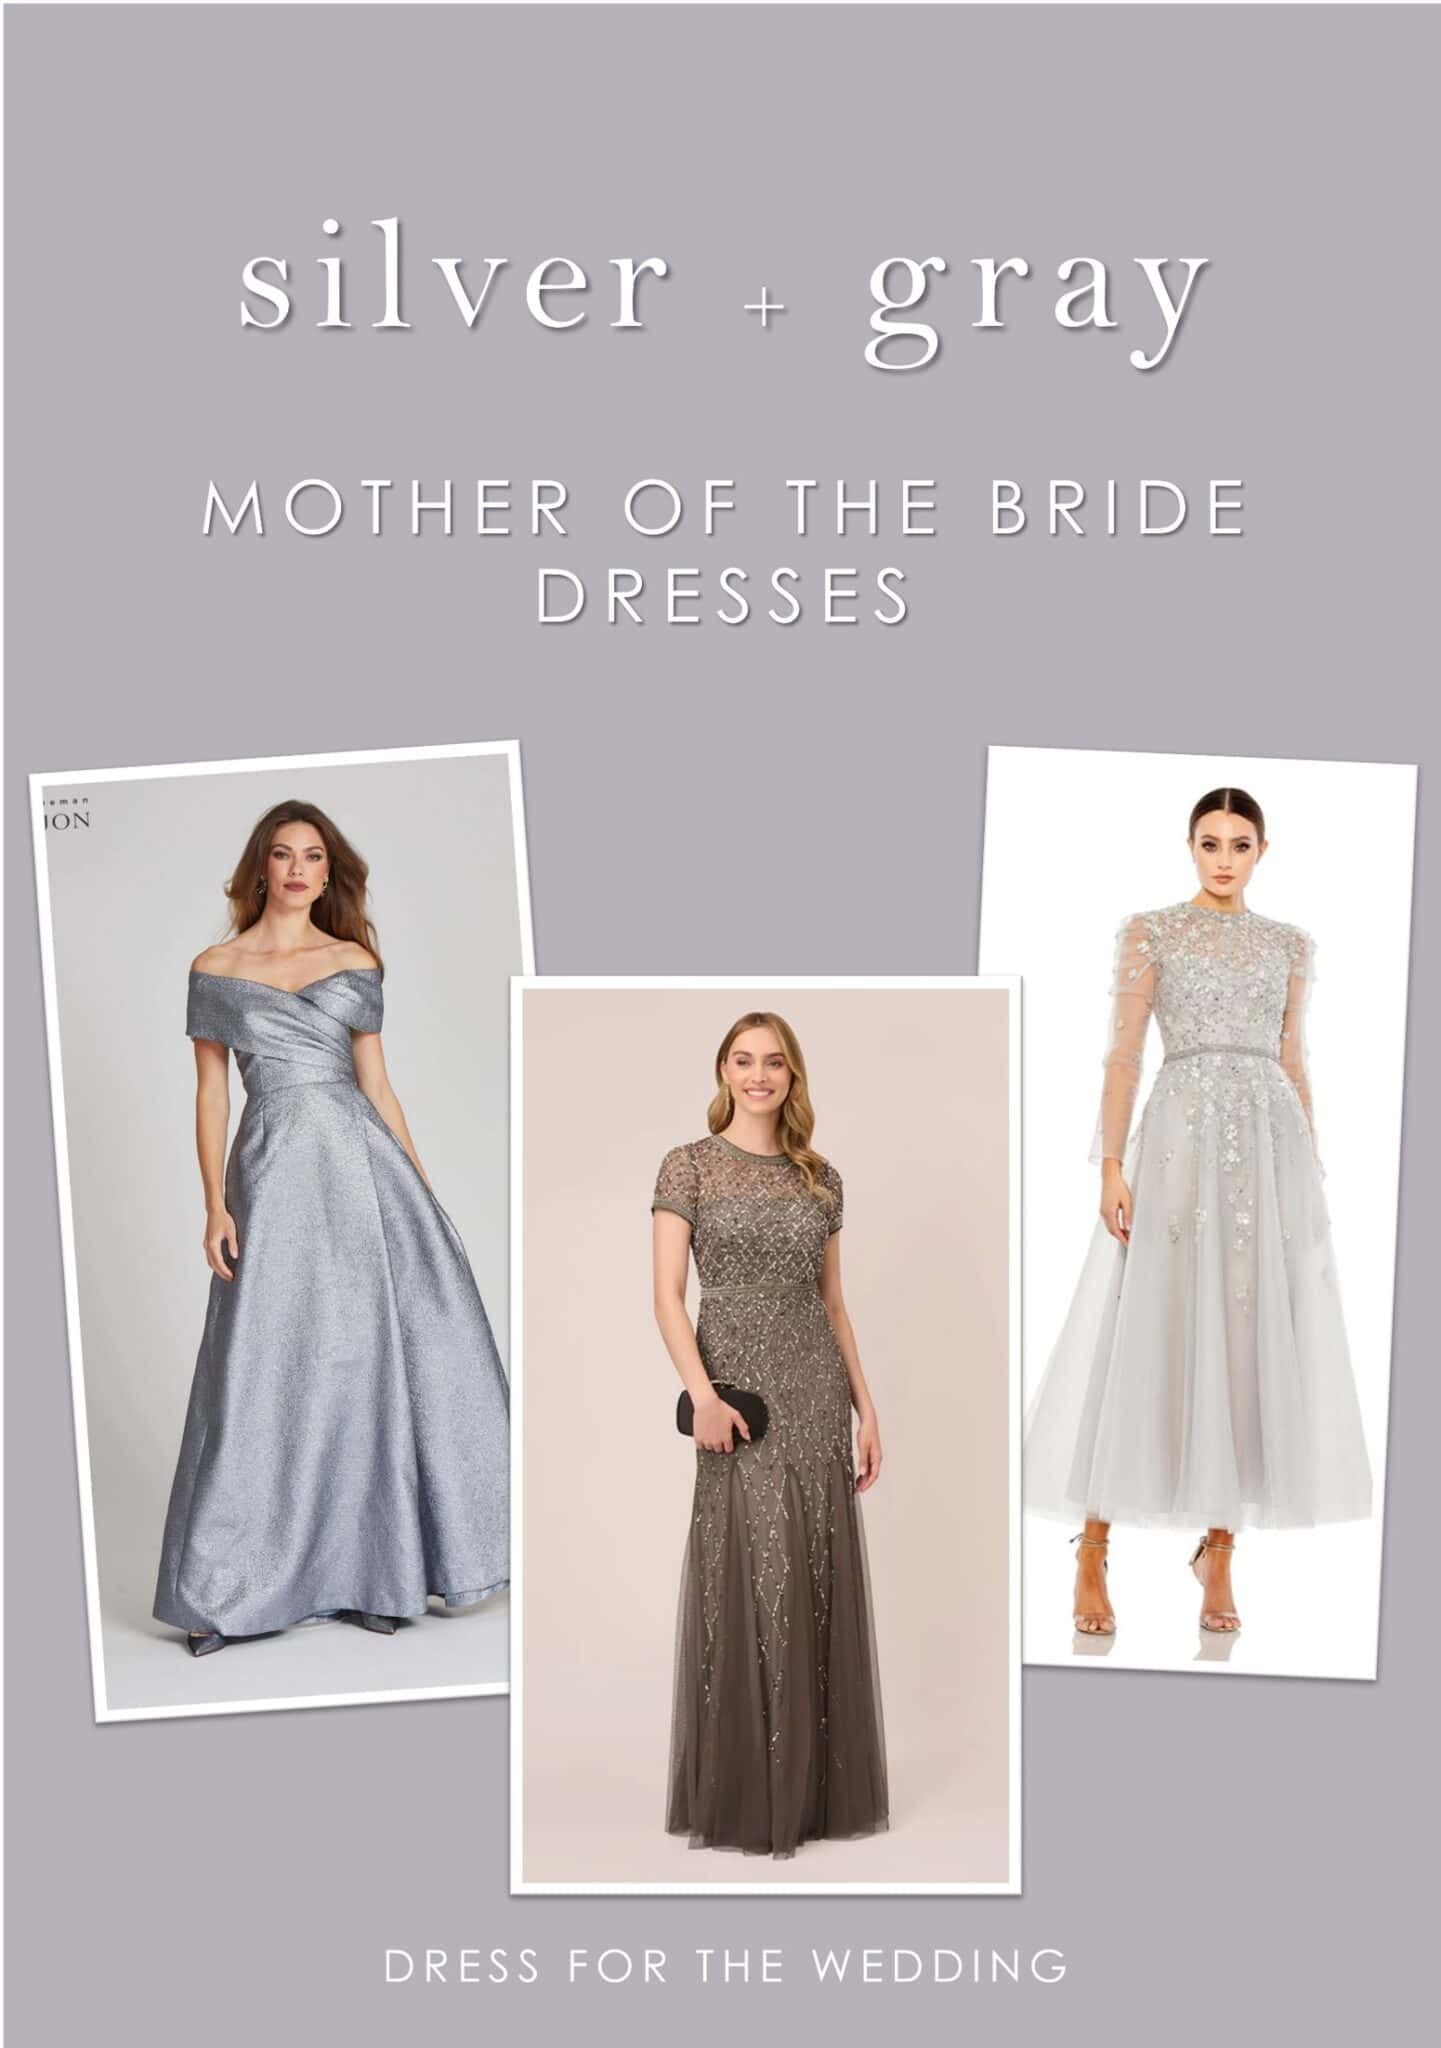 Silver or Gray Mother of the Bride Dresses | Dress for the Wedding